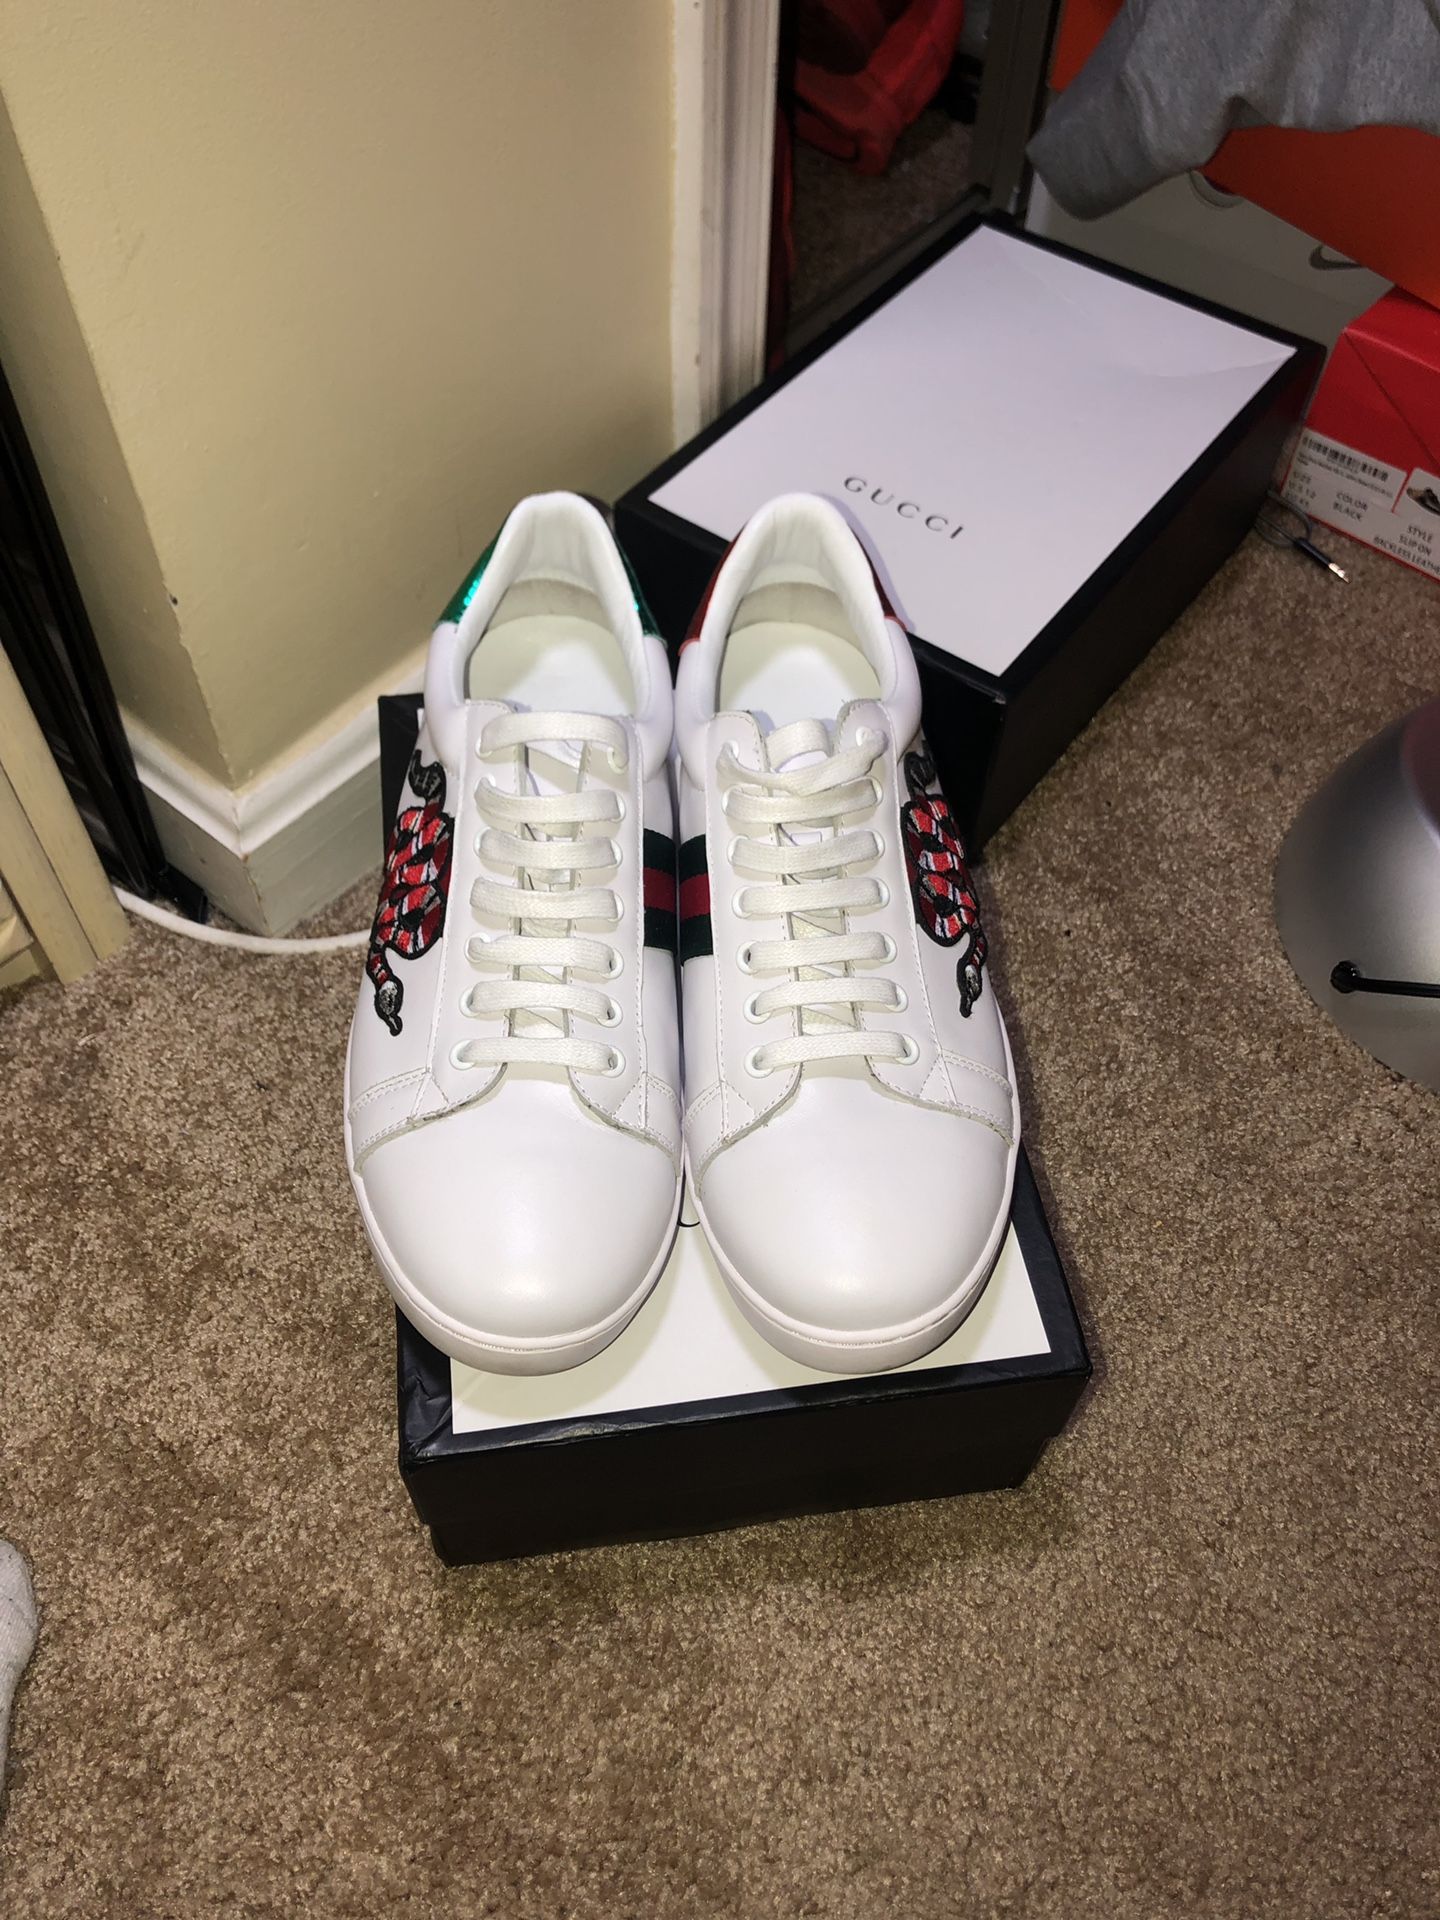 Gucci Ace men’s sneakers (SIZE 11.5)